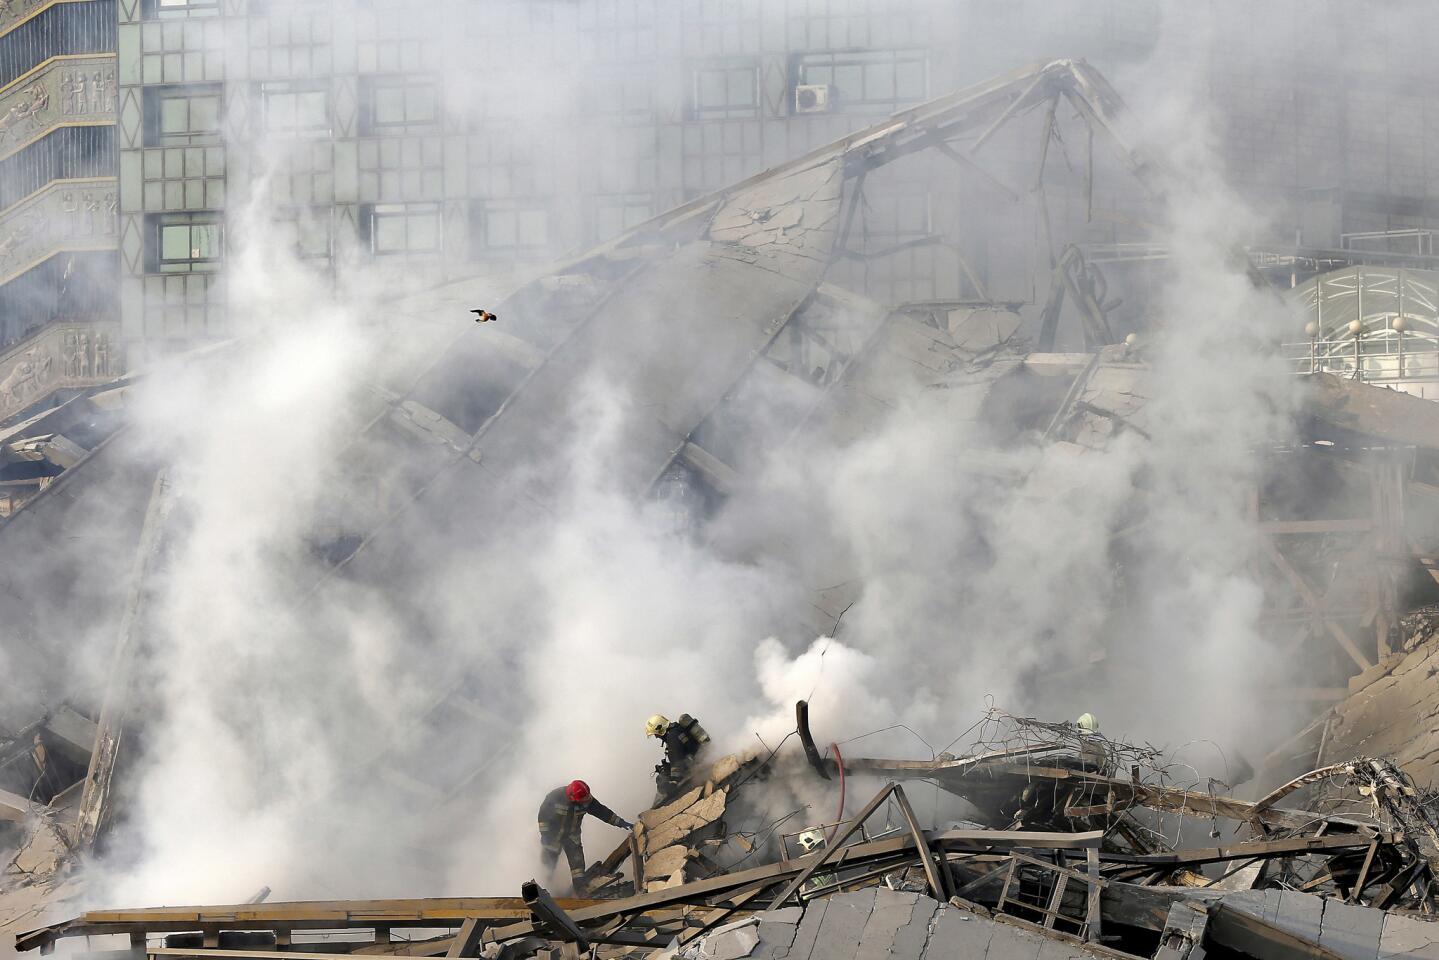 Iranian firefighters work at the scene of the Plasco building after it was engulfed by a fire and collapsed on Jan. 19, 2017, in Tehran.